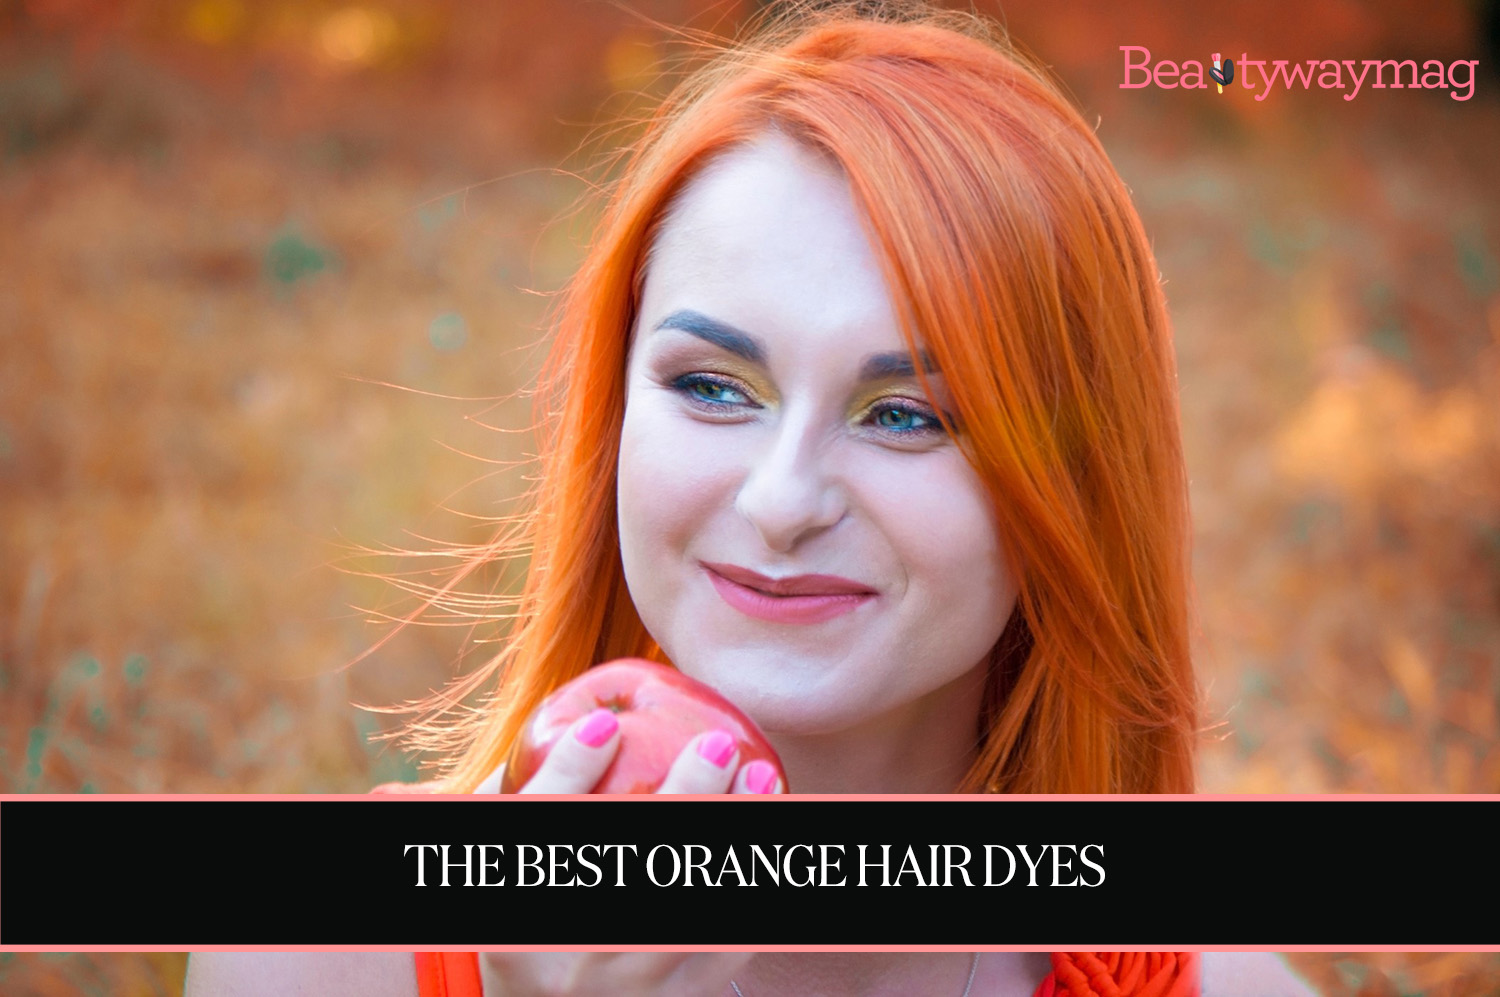 4. "The Best Blonde Orange Hair Dyes for DIY Coloring" - wide 5